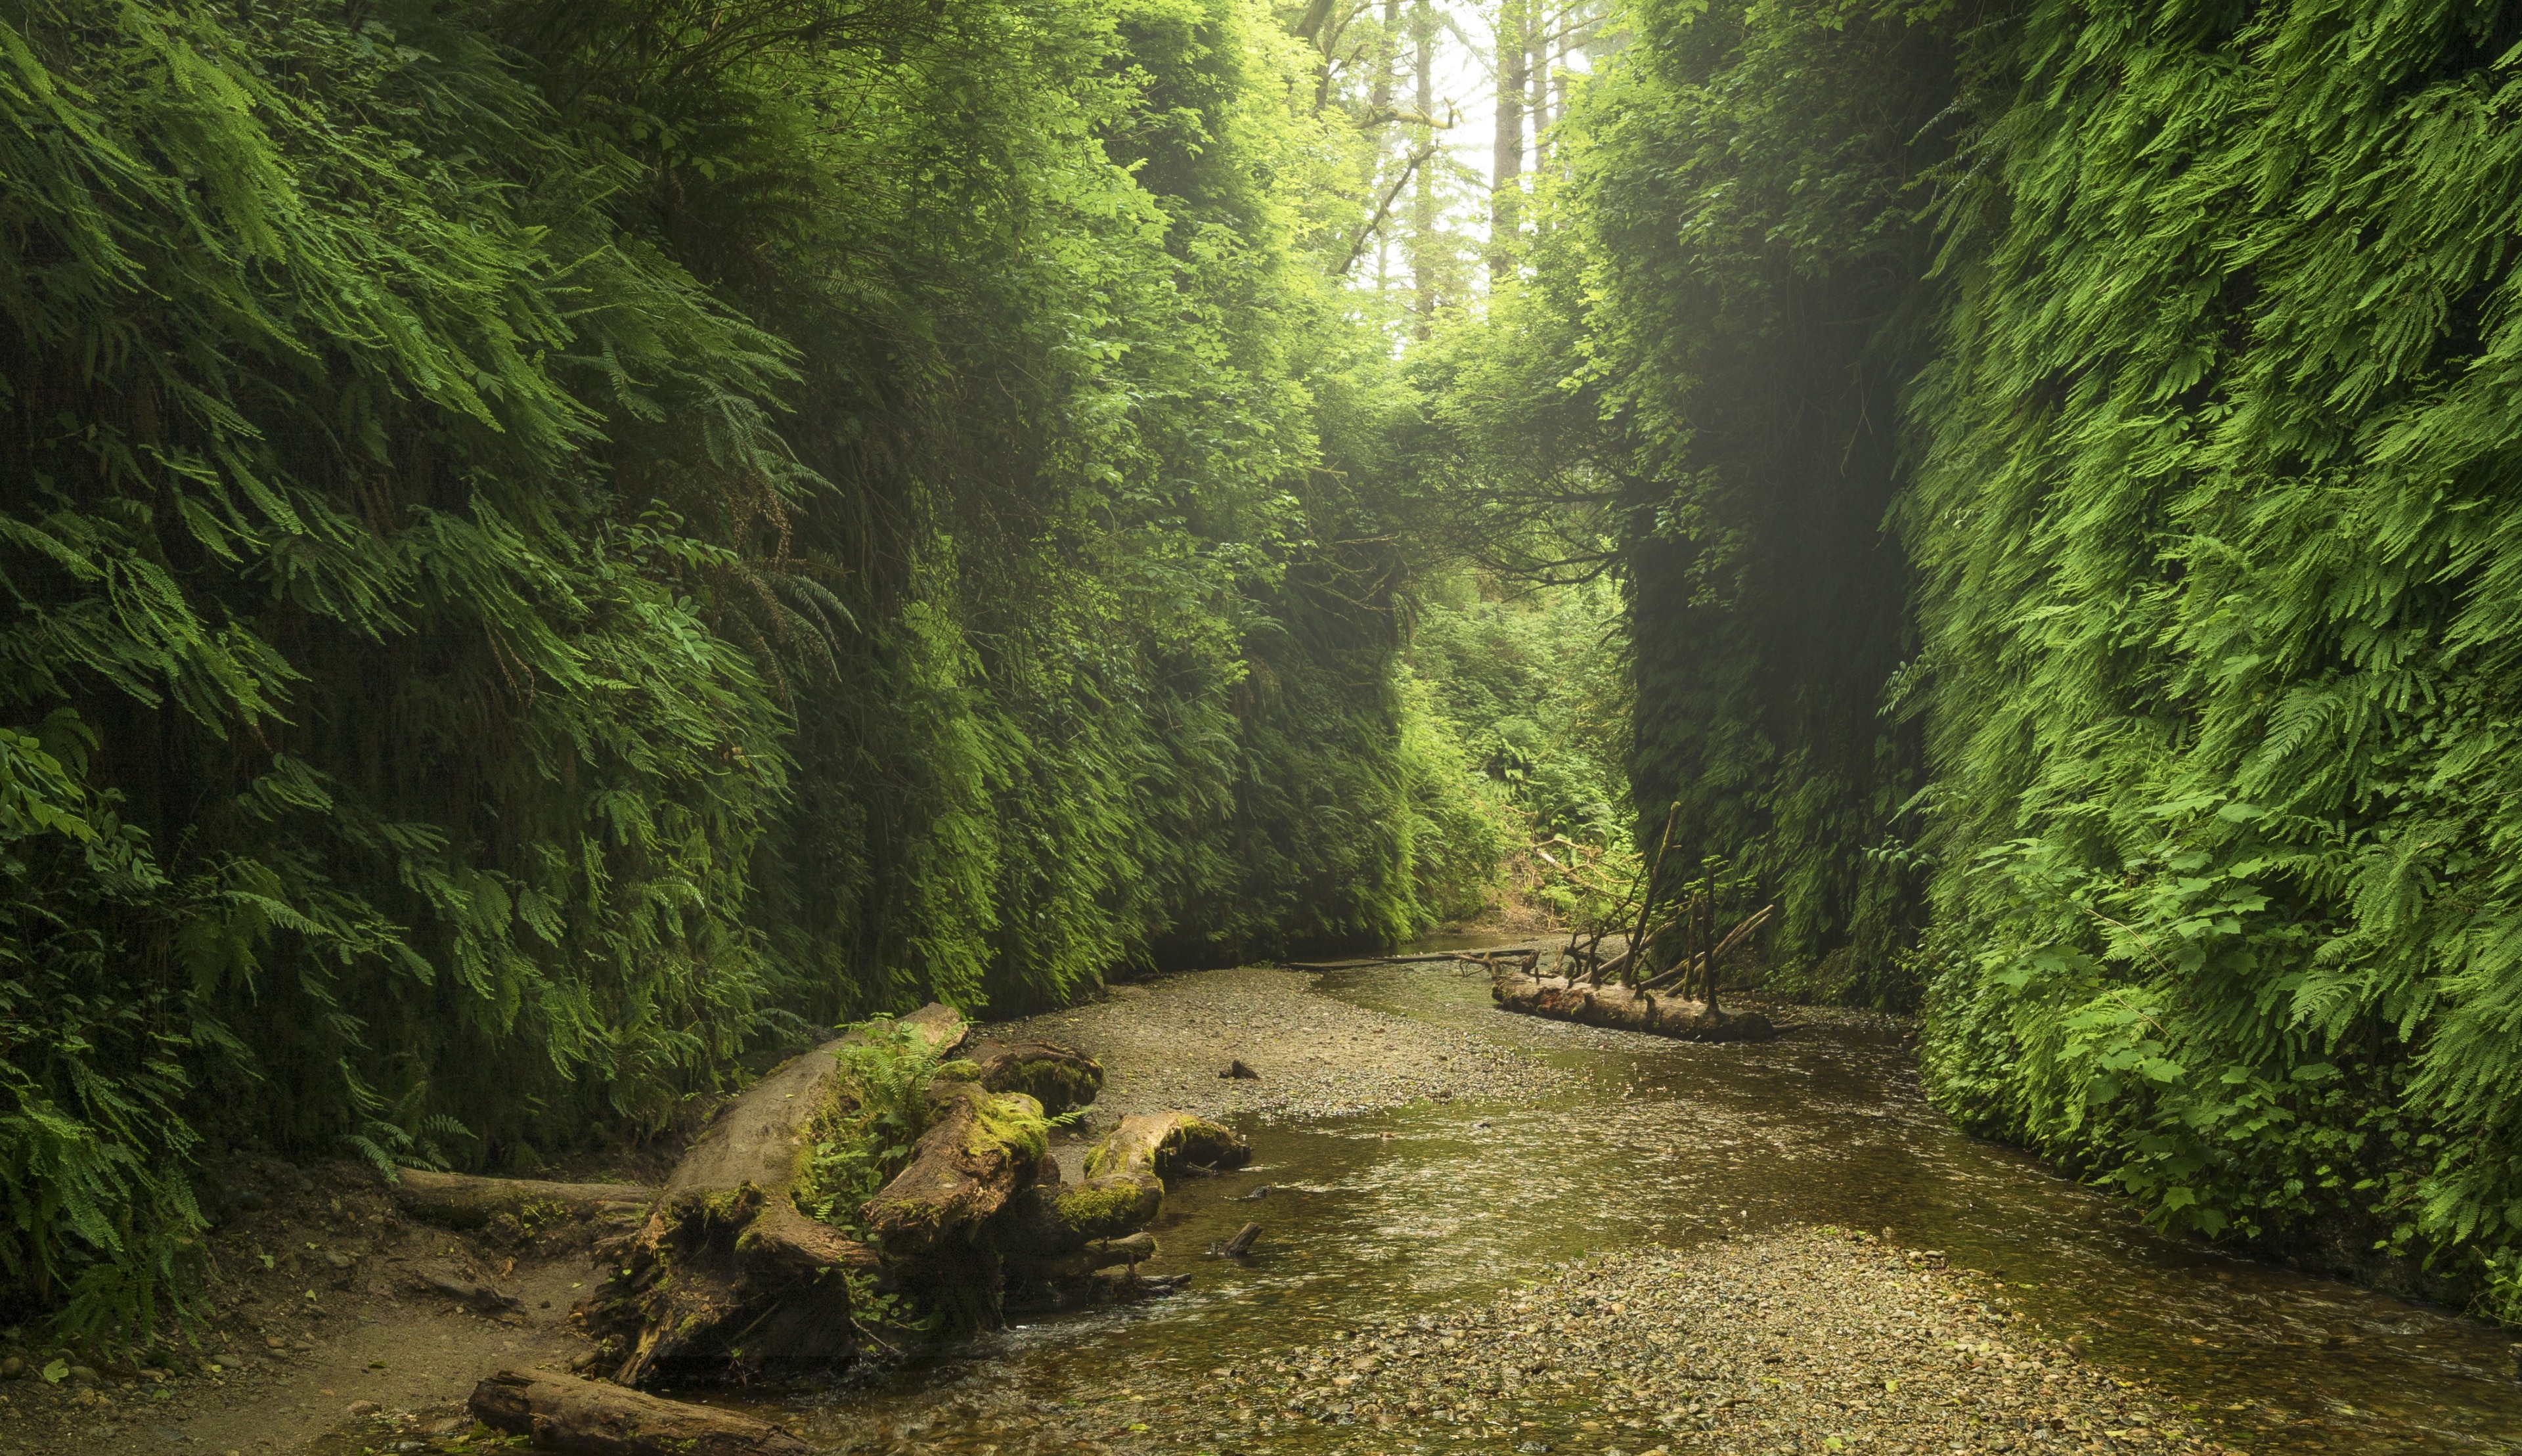 A relatively unknown location, Fern Canyon is exactly what it sounds like. Wall to wall ferns make this short hike feel truly prehistoric. #ADVENTURE